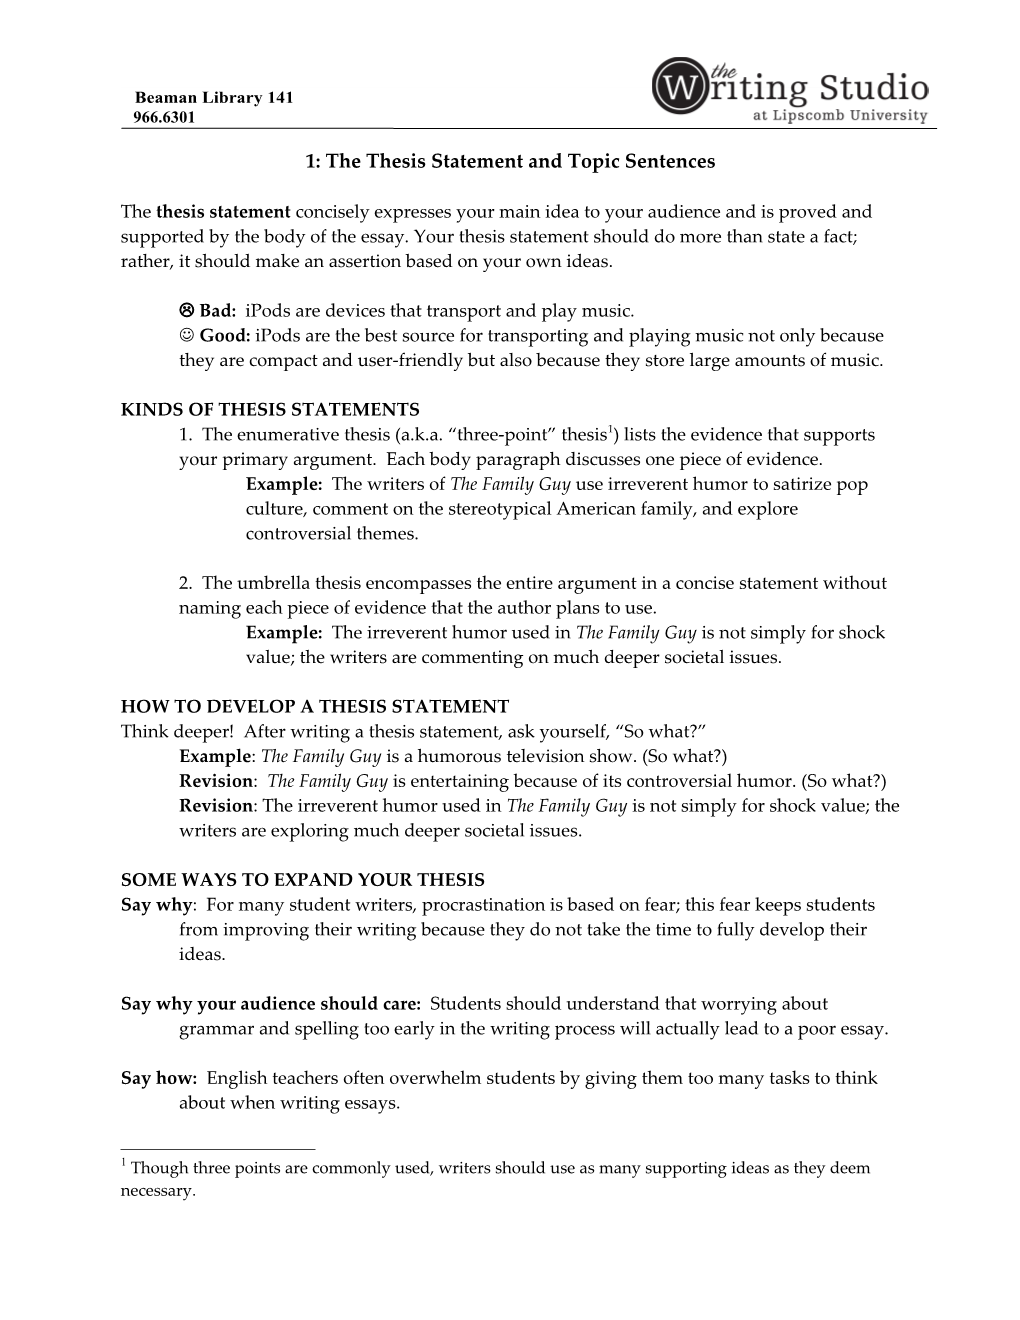 The Thesis Statement and Topic Sentences